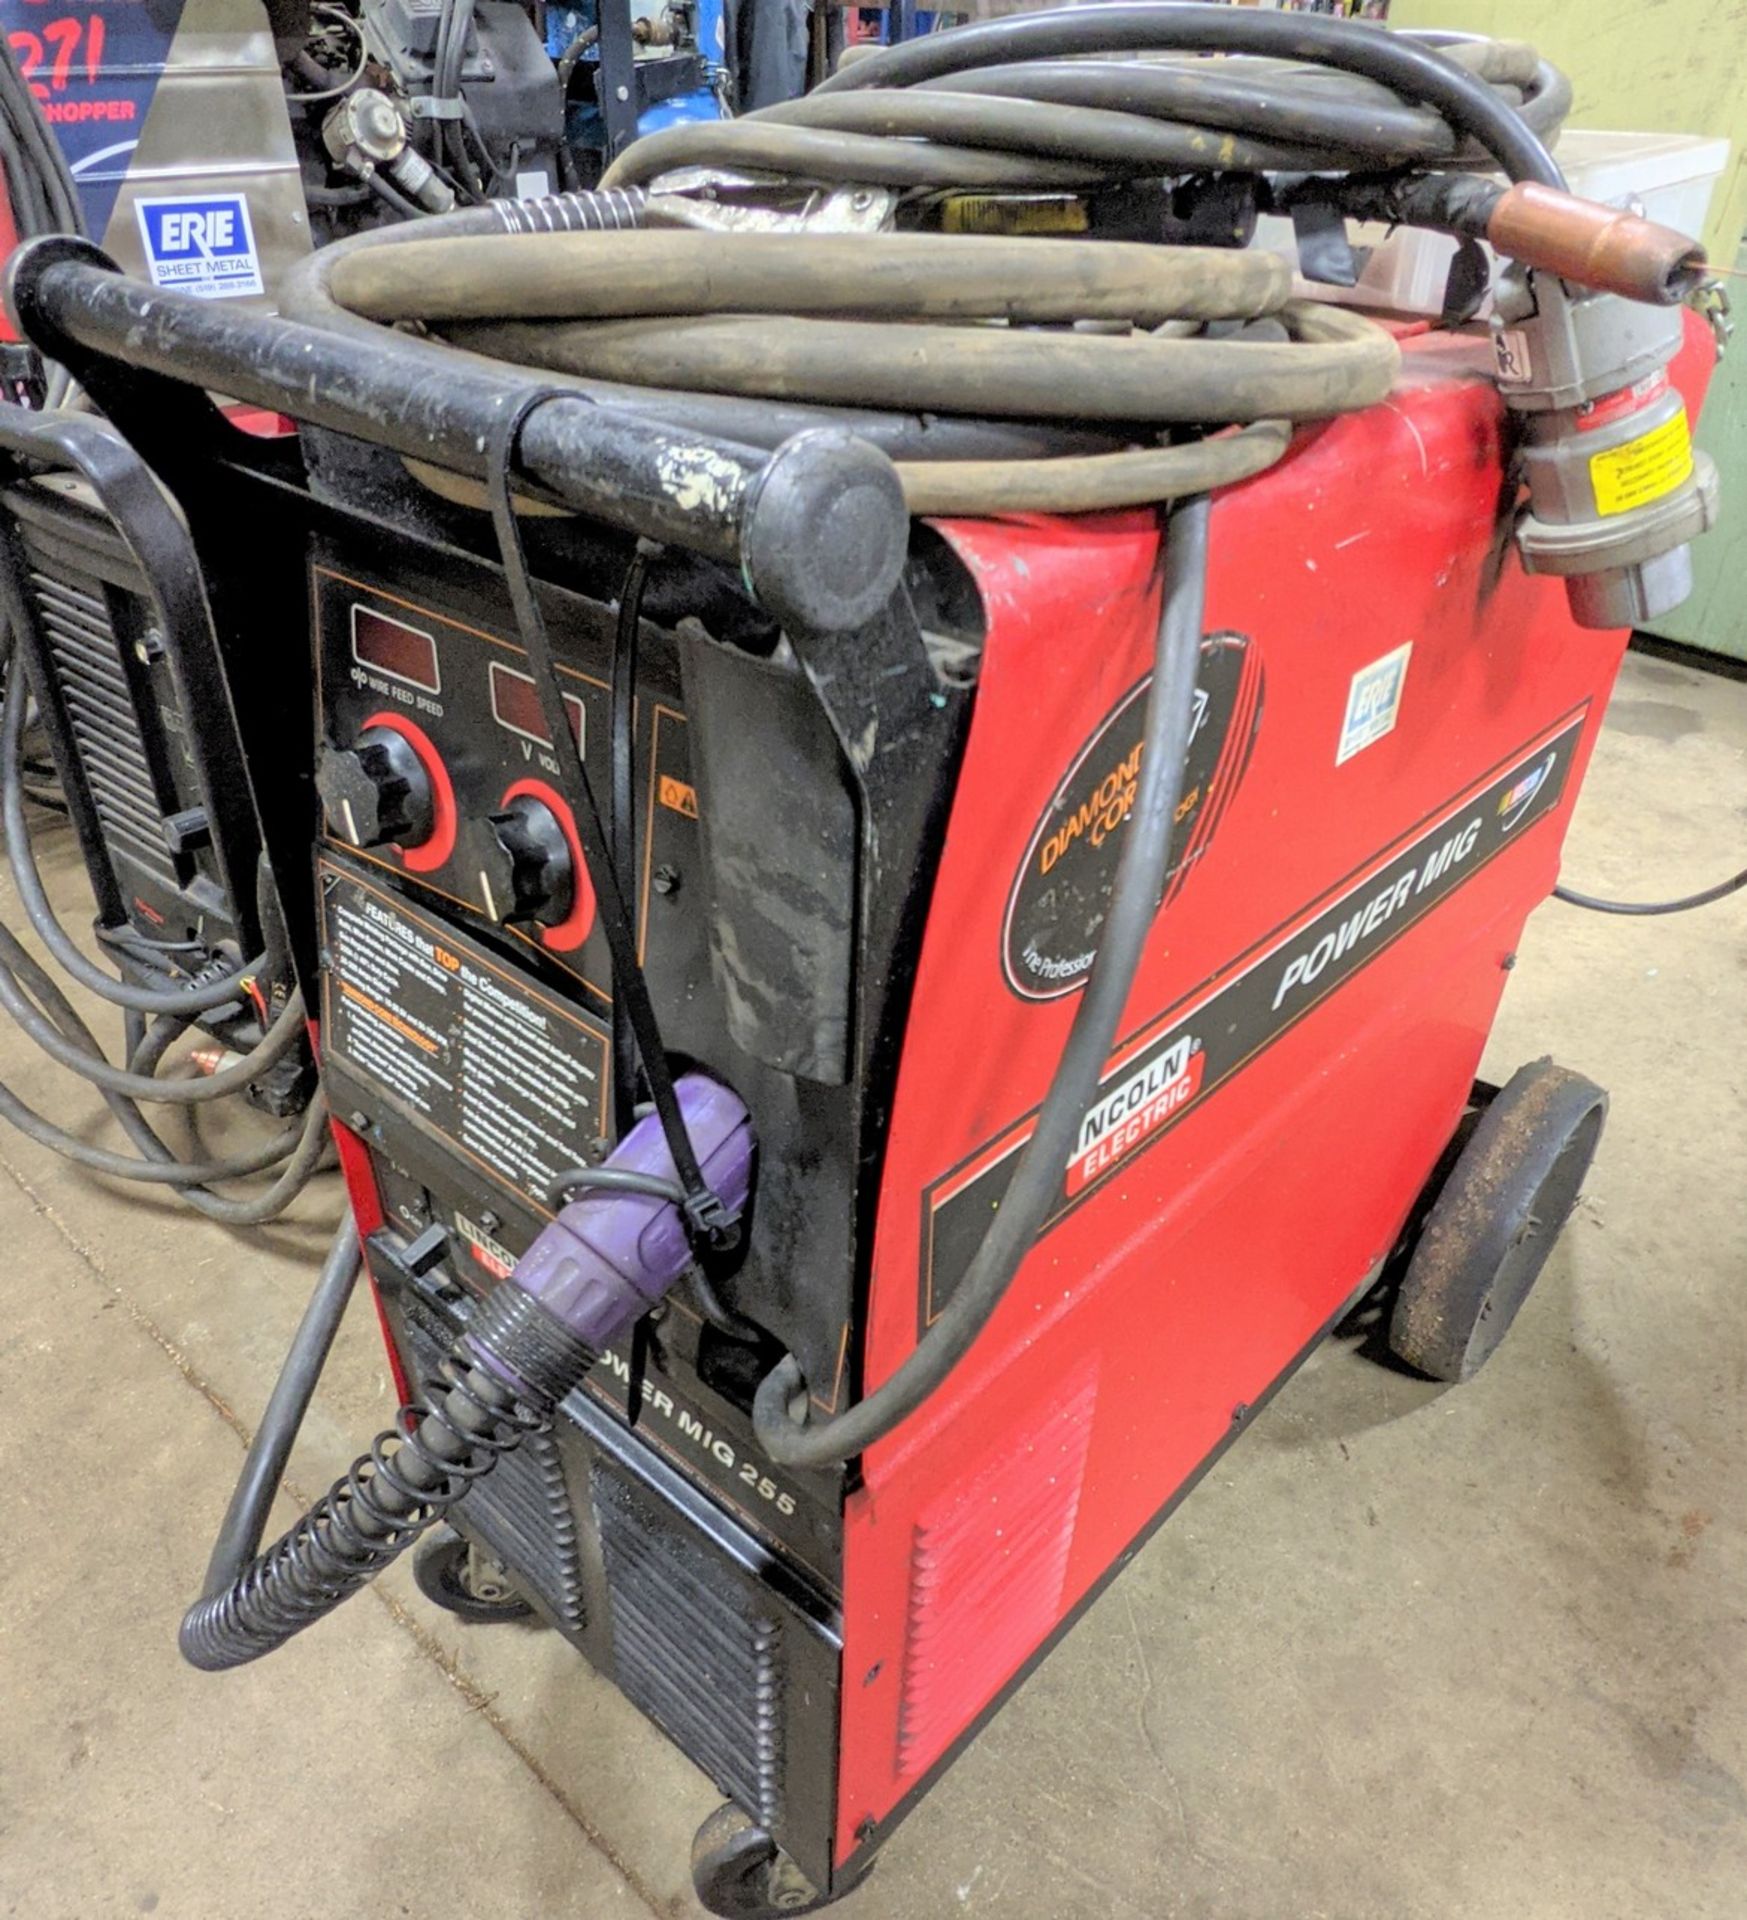 LINCOLN ELECTRIC POWER MIG 255 WELDER, S/N K1693-10986 U1030405834 W/ ANTRA HTH-1800A MASK - Image 2 of 6